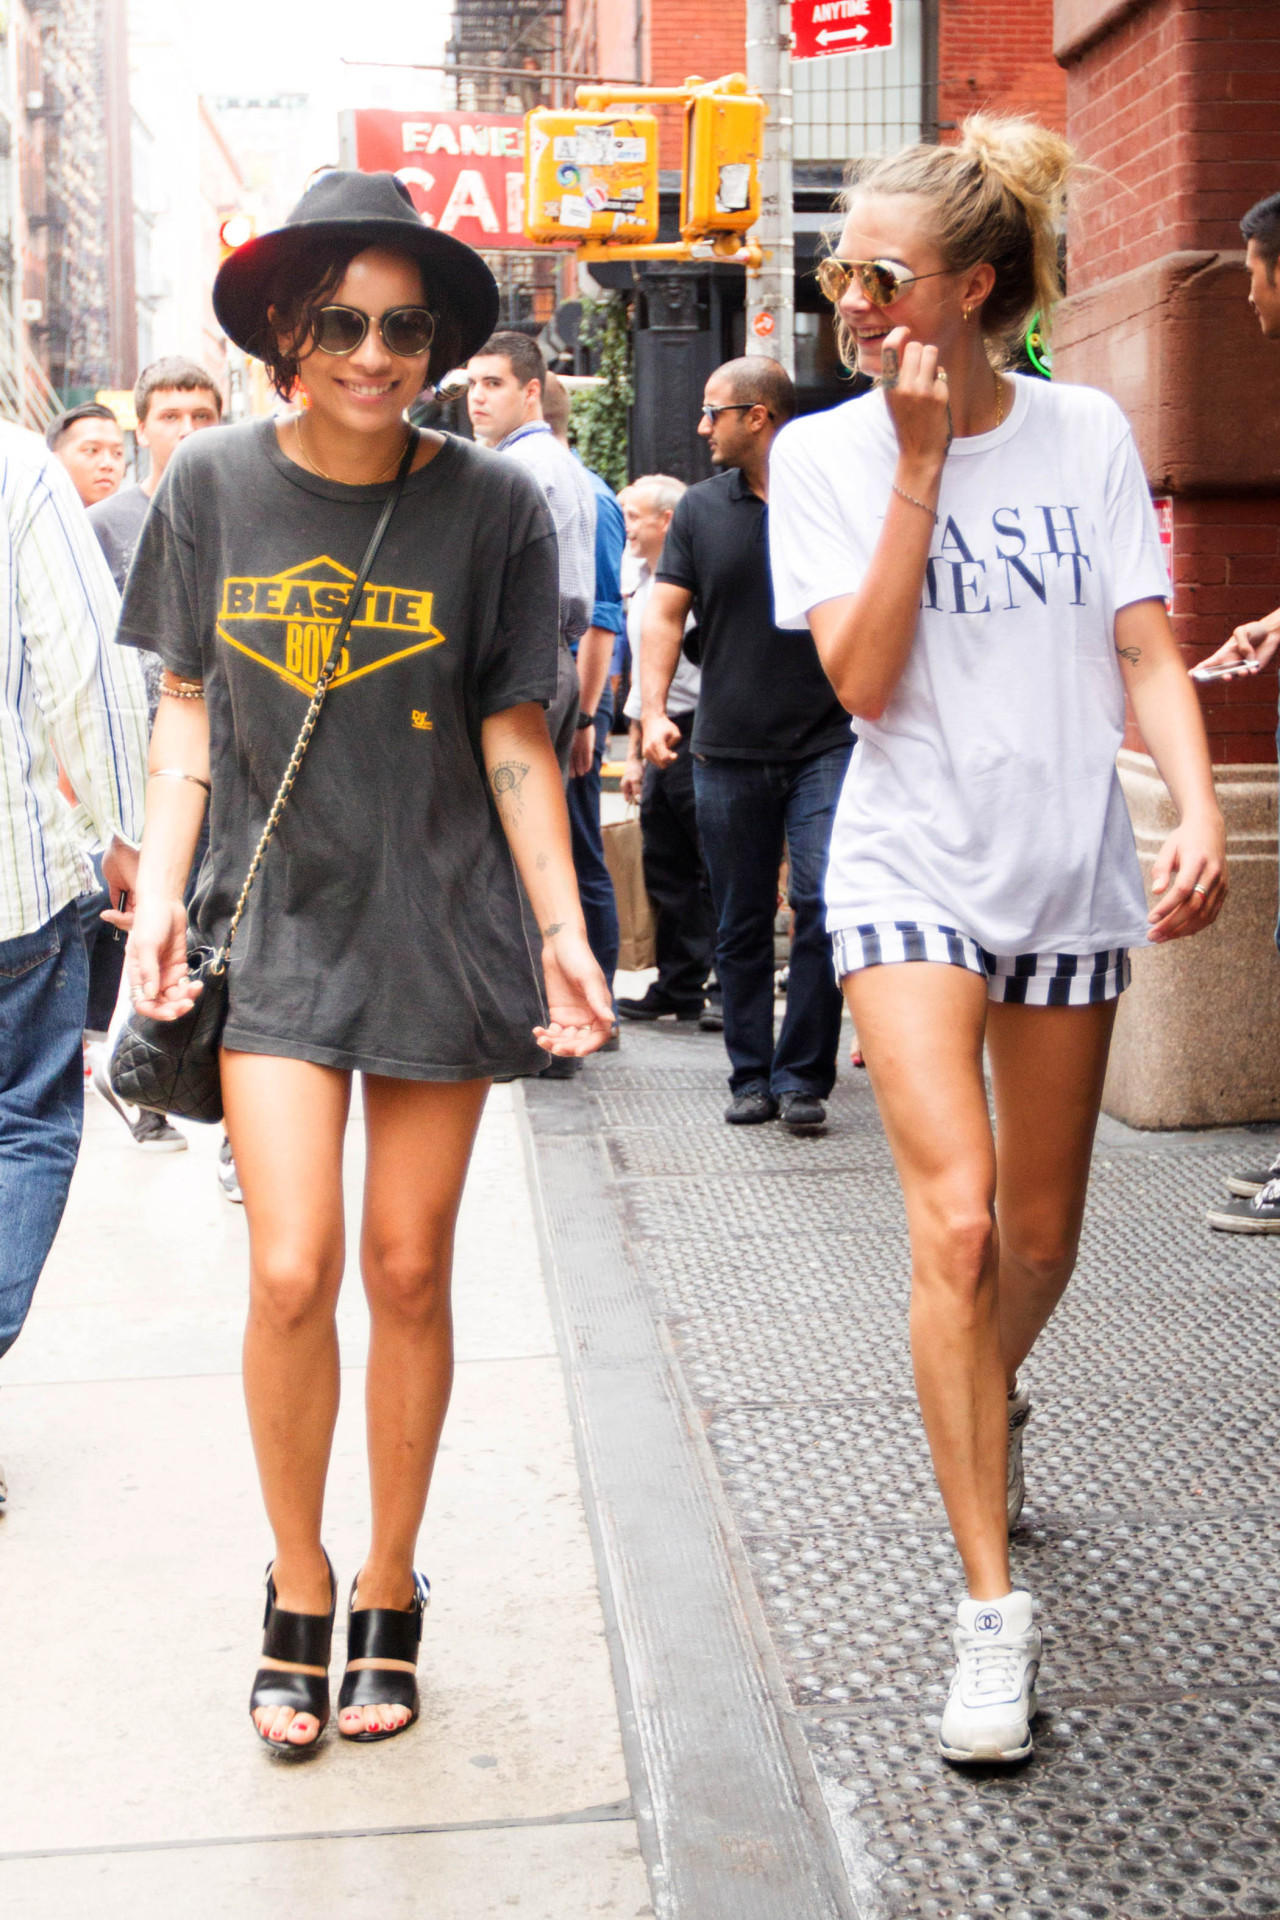 cara-made-me-do-it: Cara Delevingne out in Soho with Zoe Kravitz 21.08.14 